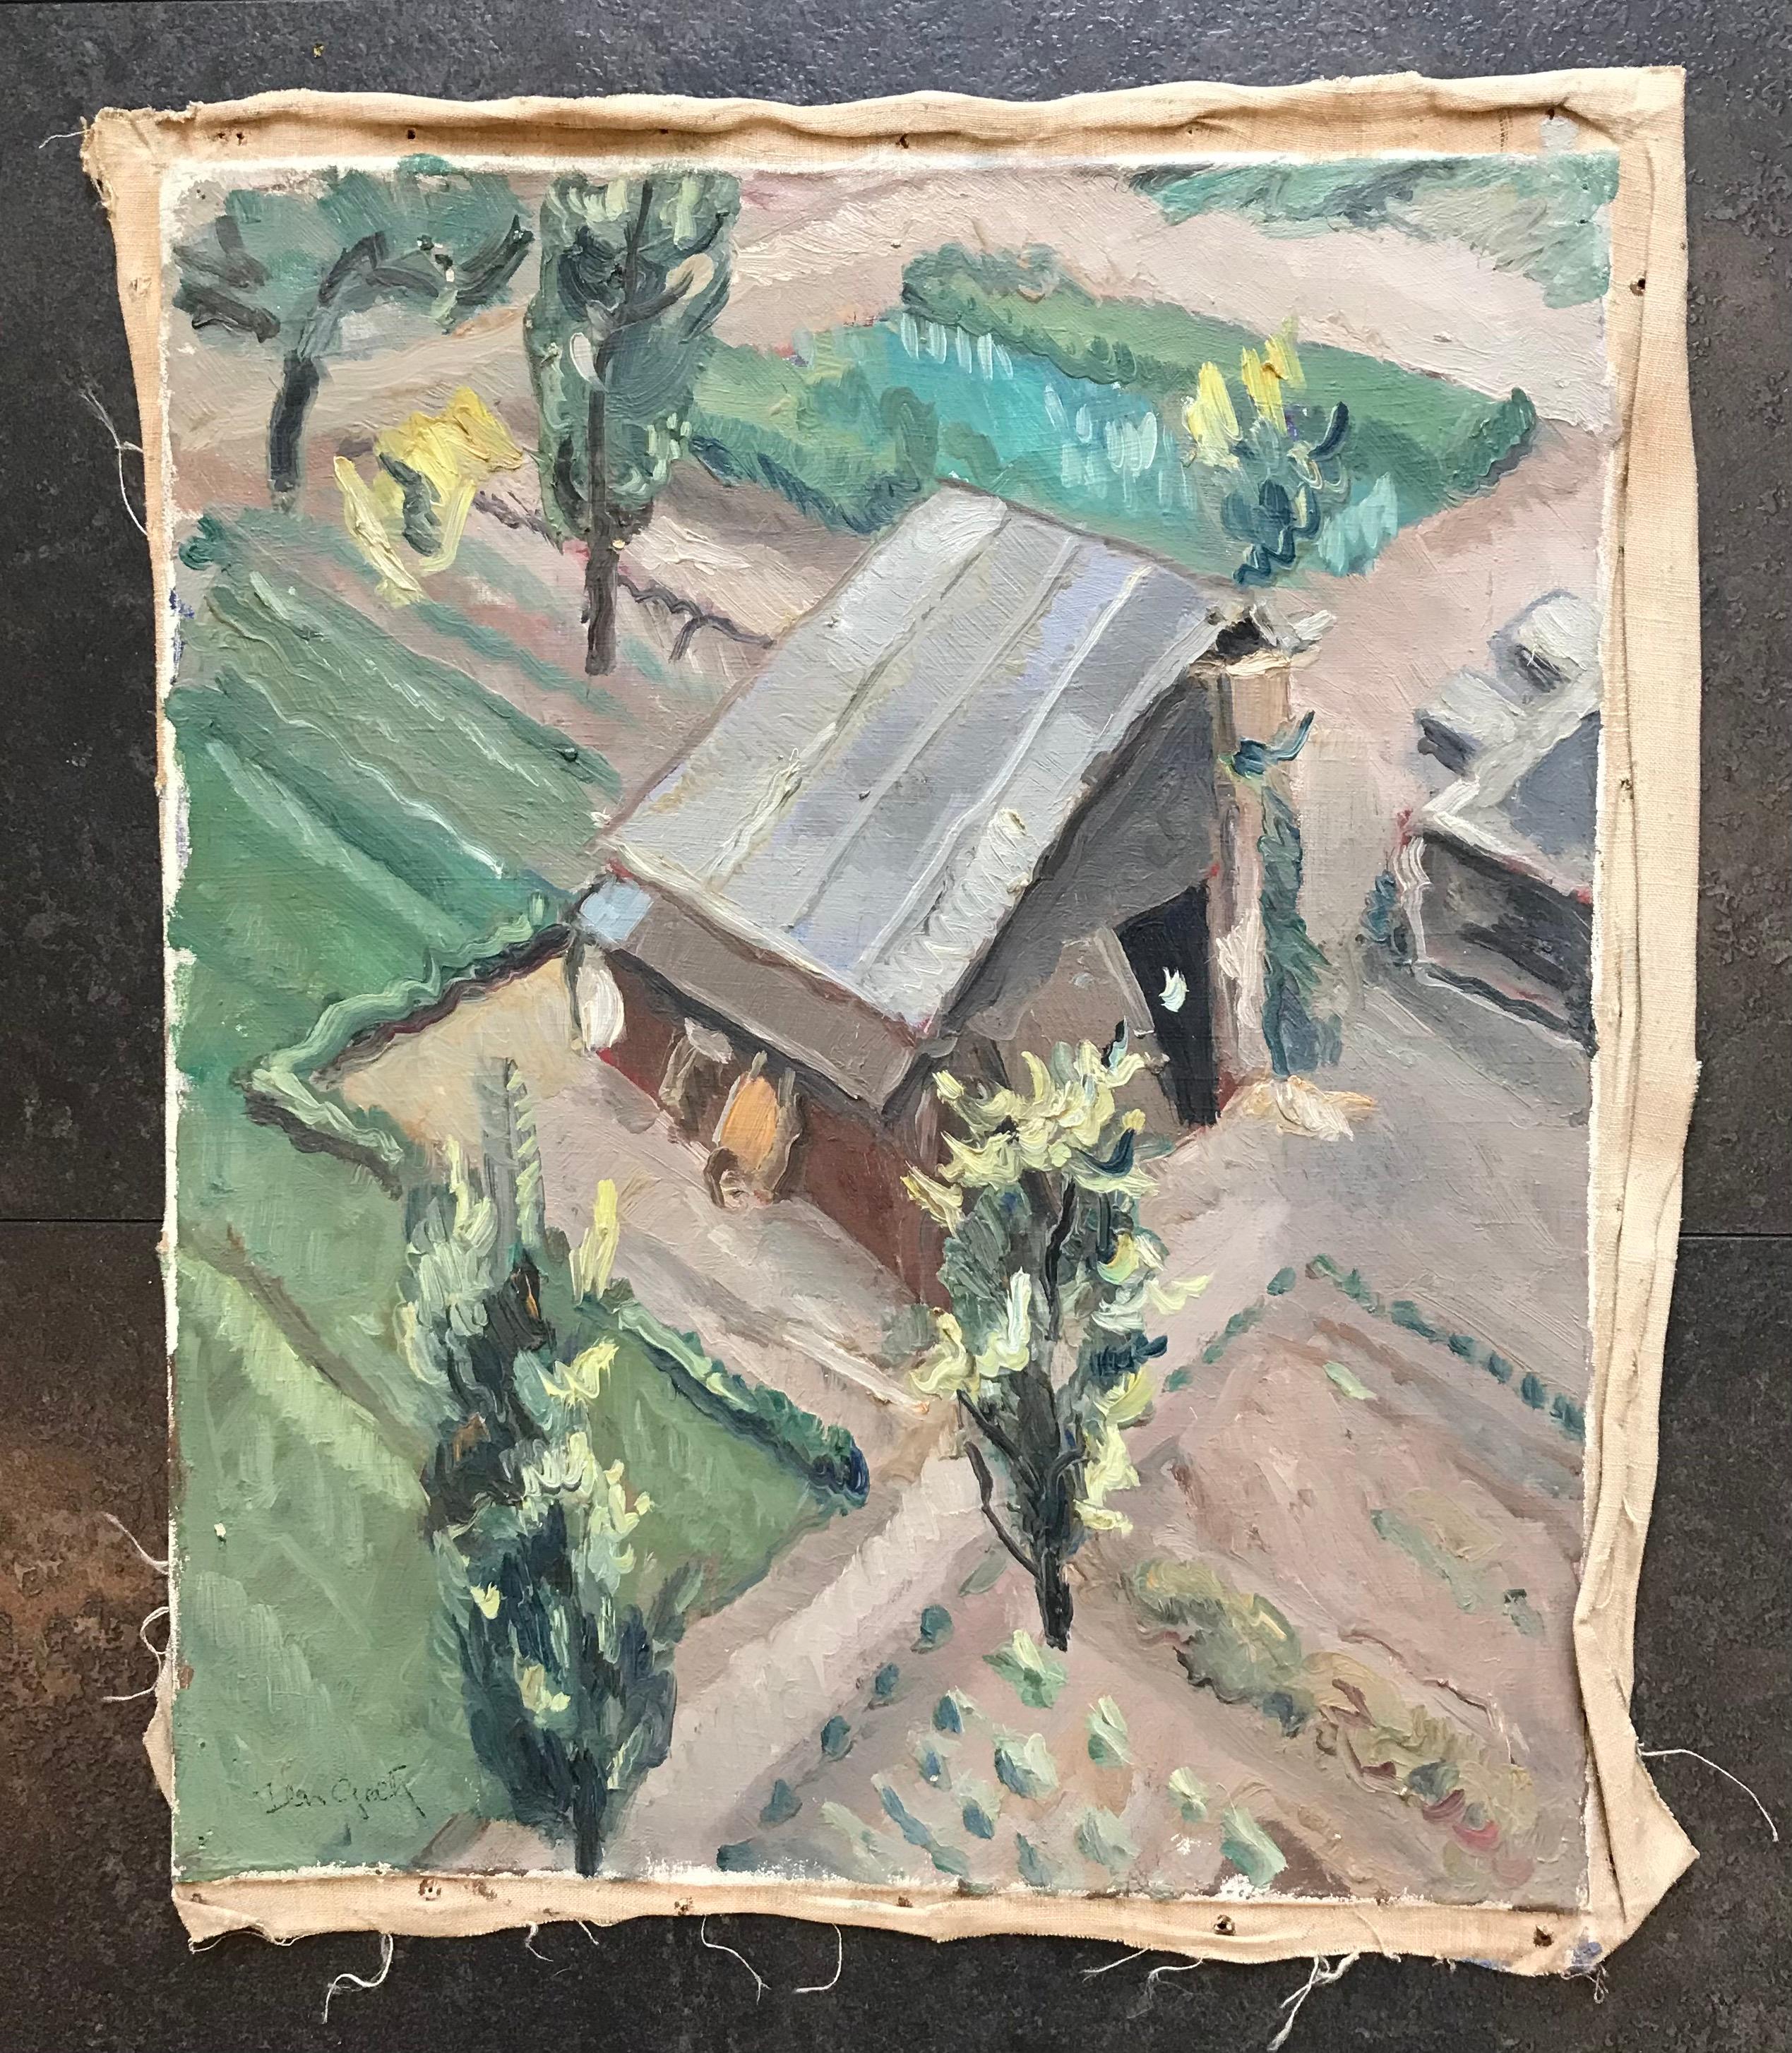 Barn view from above by I. Ch. Goetz - Oil on canvas 38x46 cm - Painting by Isaac Charles Goetz